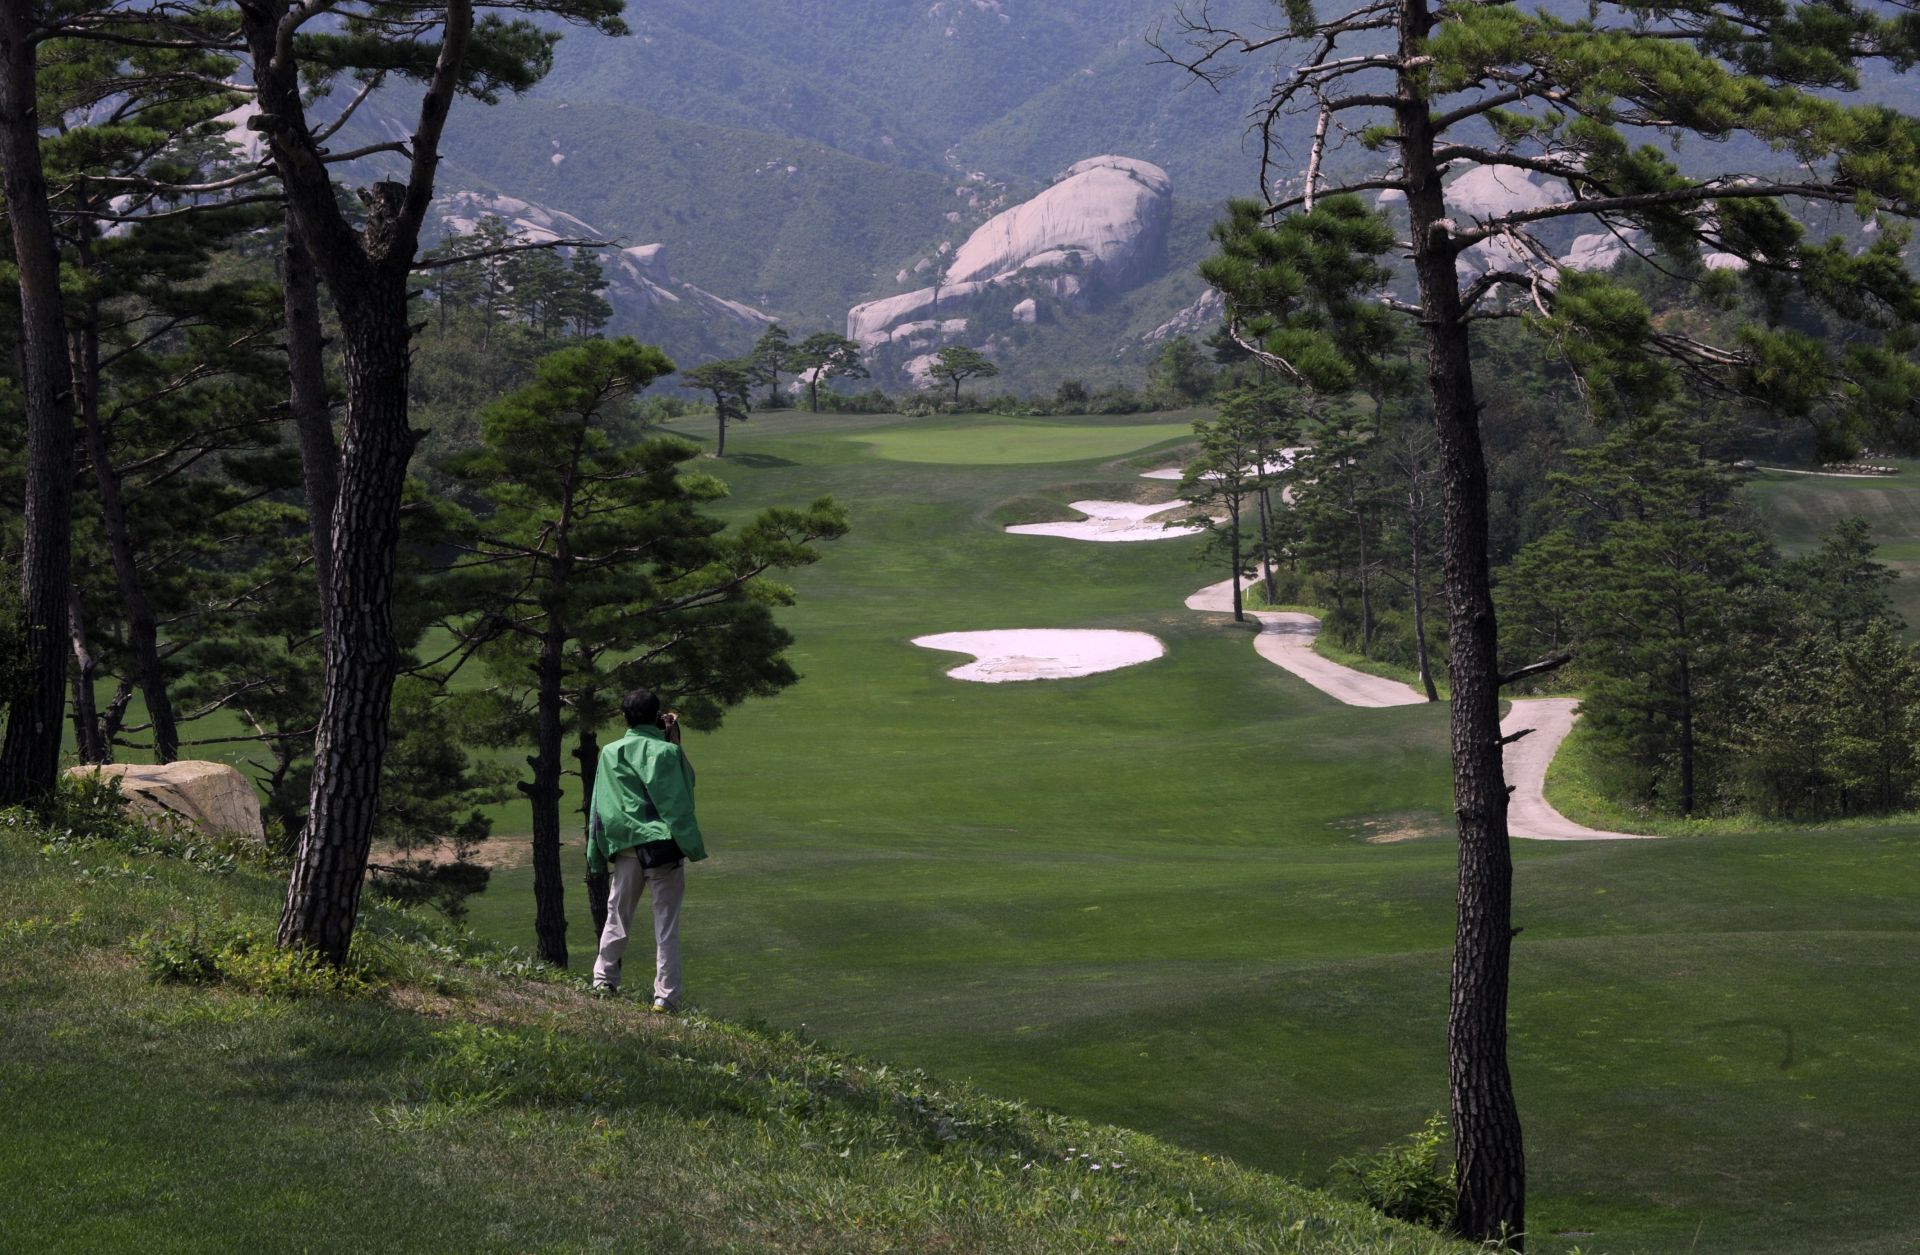 This photo shows a Chinese tourist photographing the derelict golf course at the shuttered Mount Kumgang resort in North Korea.